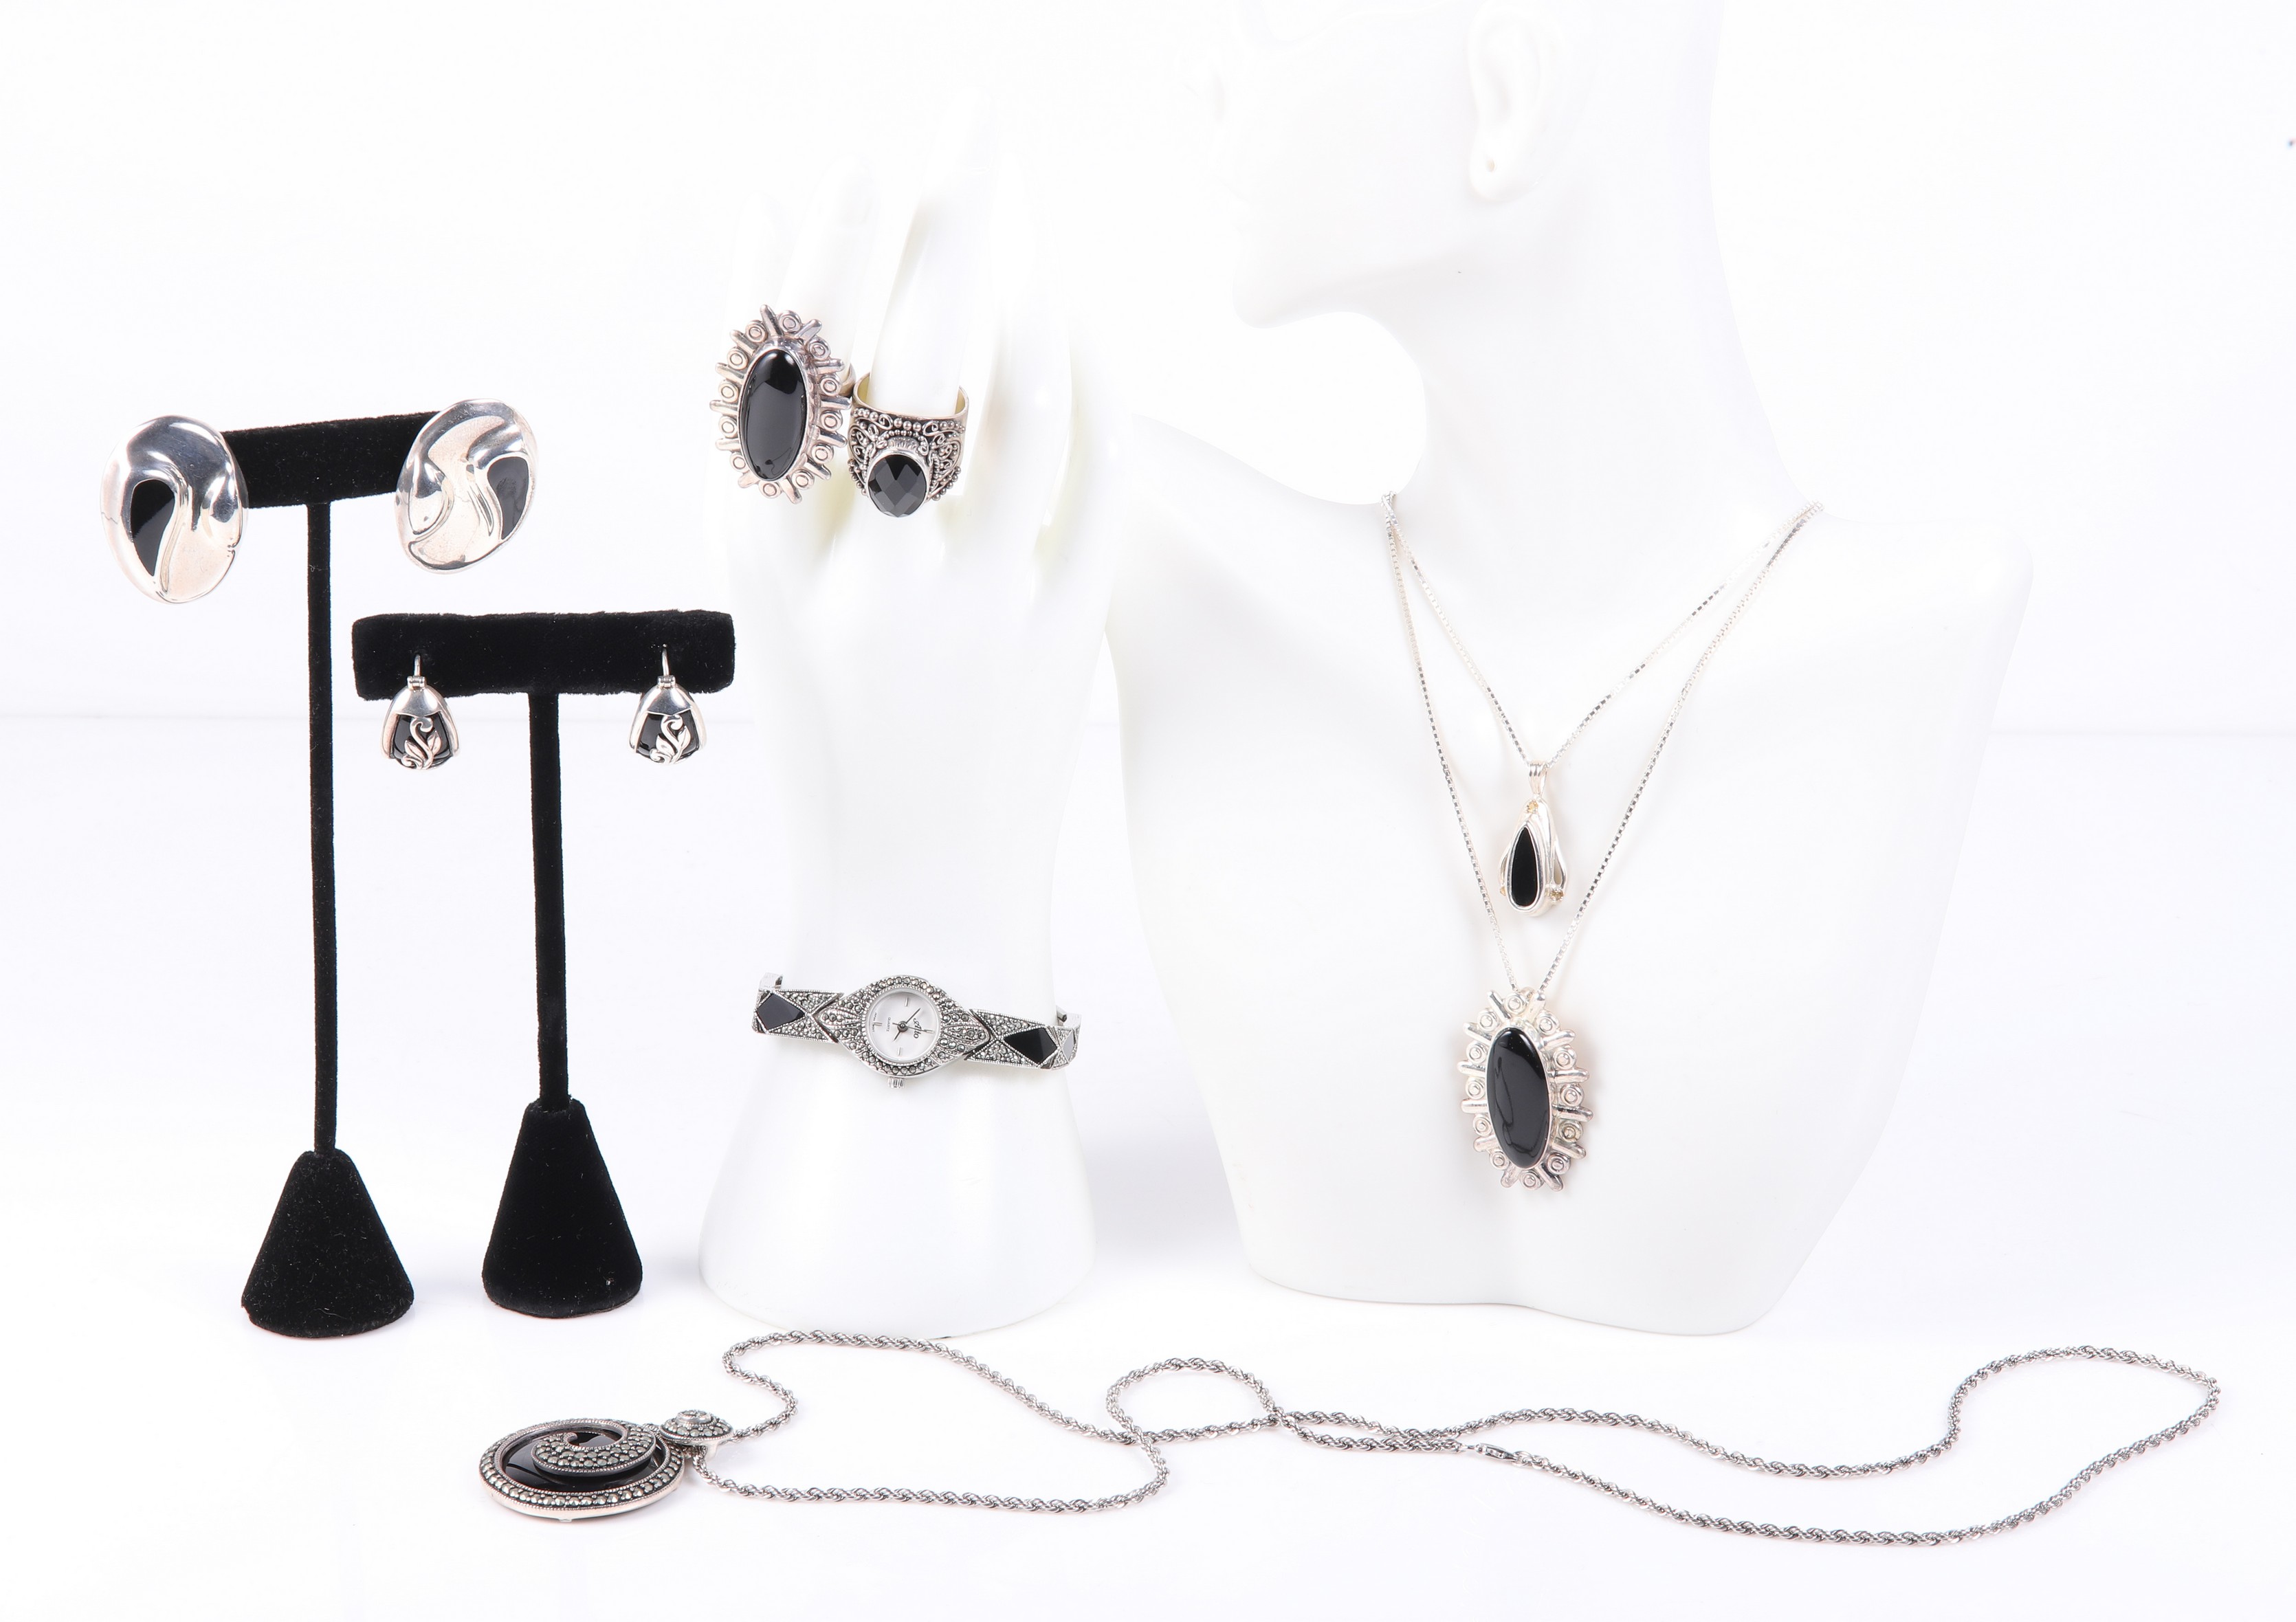  8 Pc onyx and sterling jewelry 2e1319